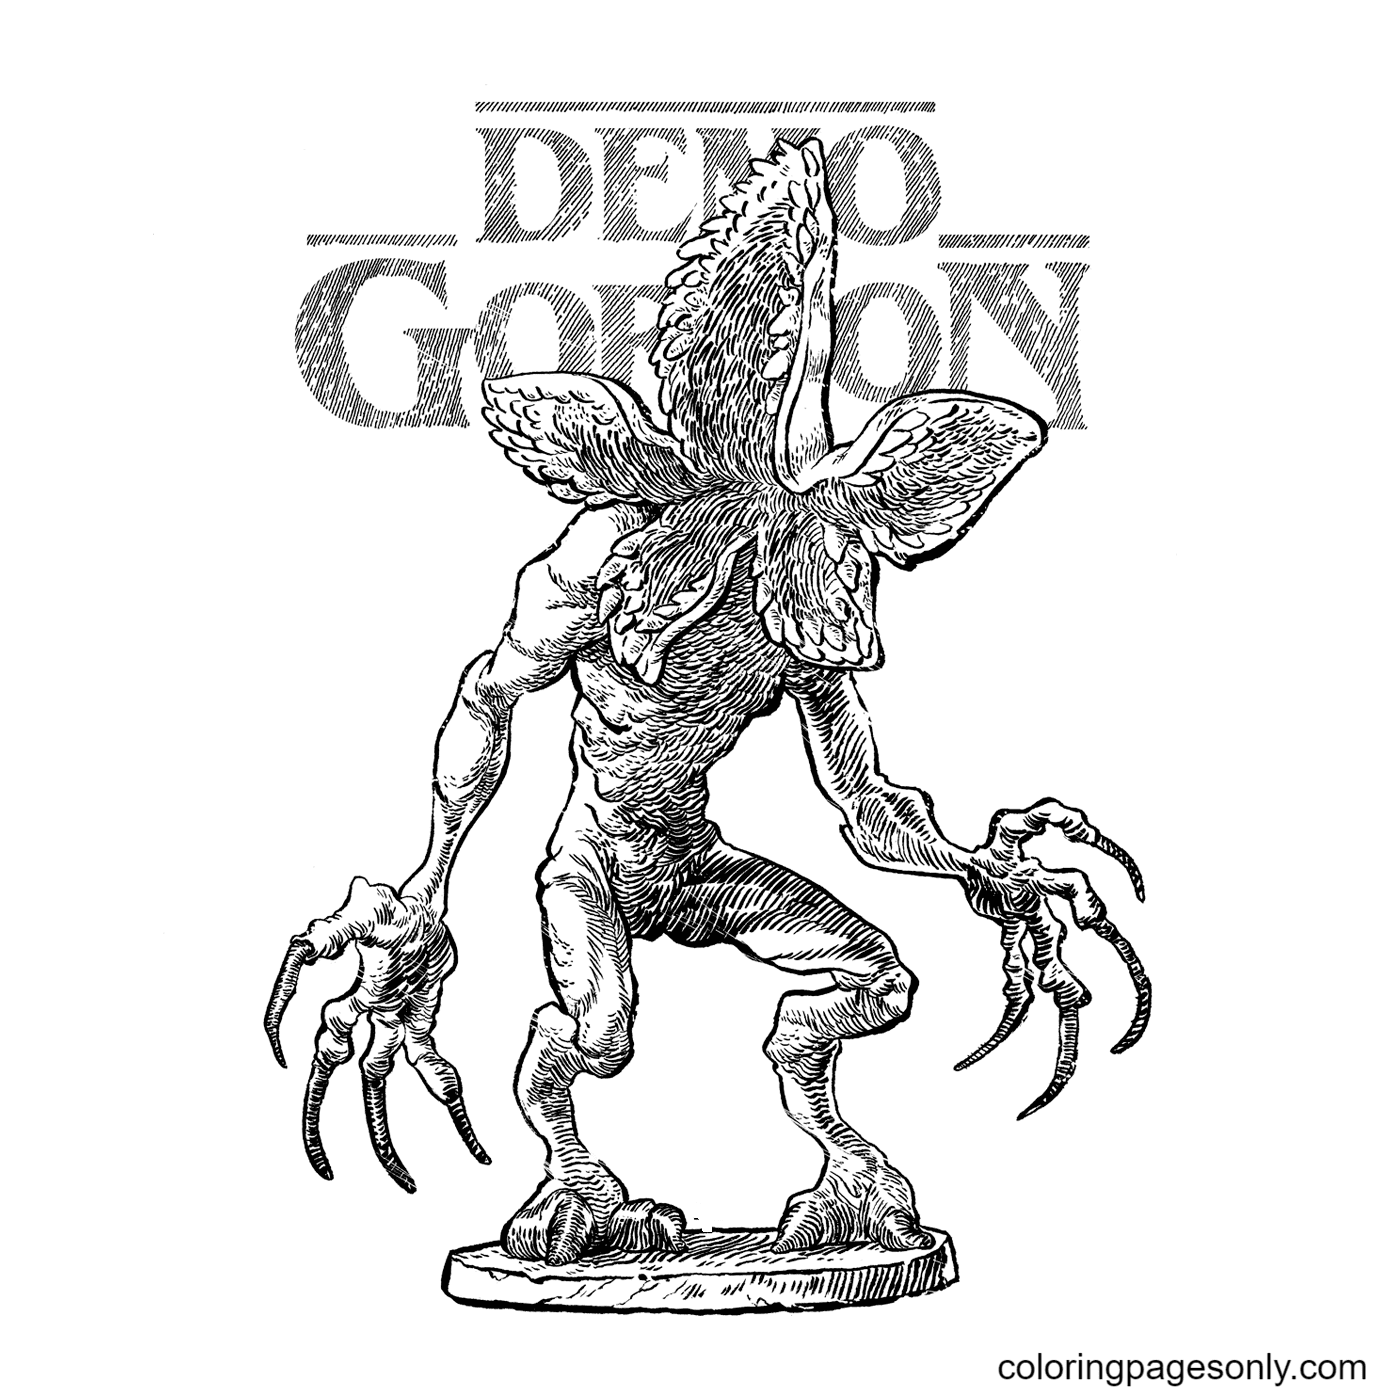 Demogorgon Monster Coloring Pages